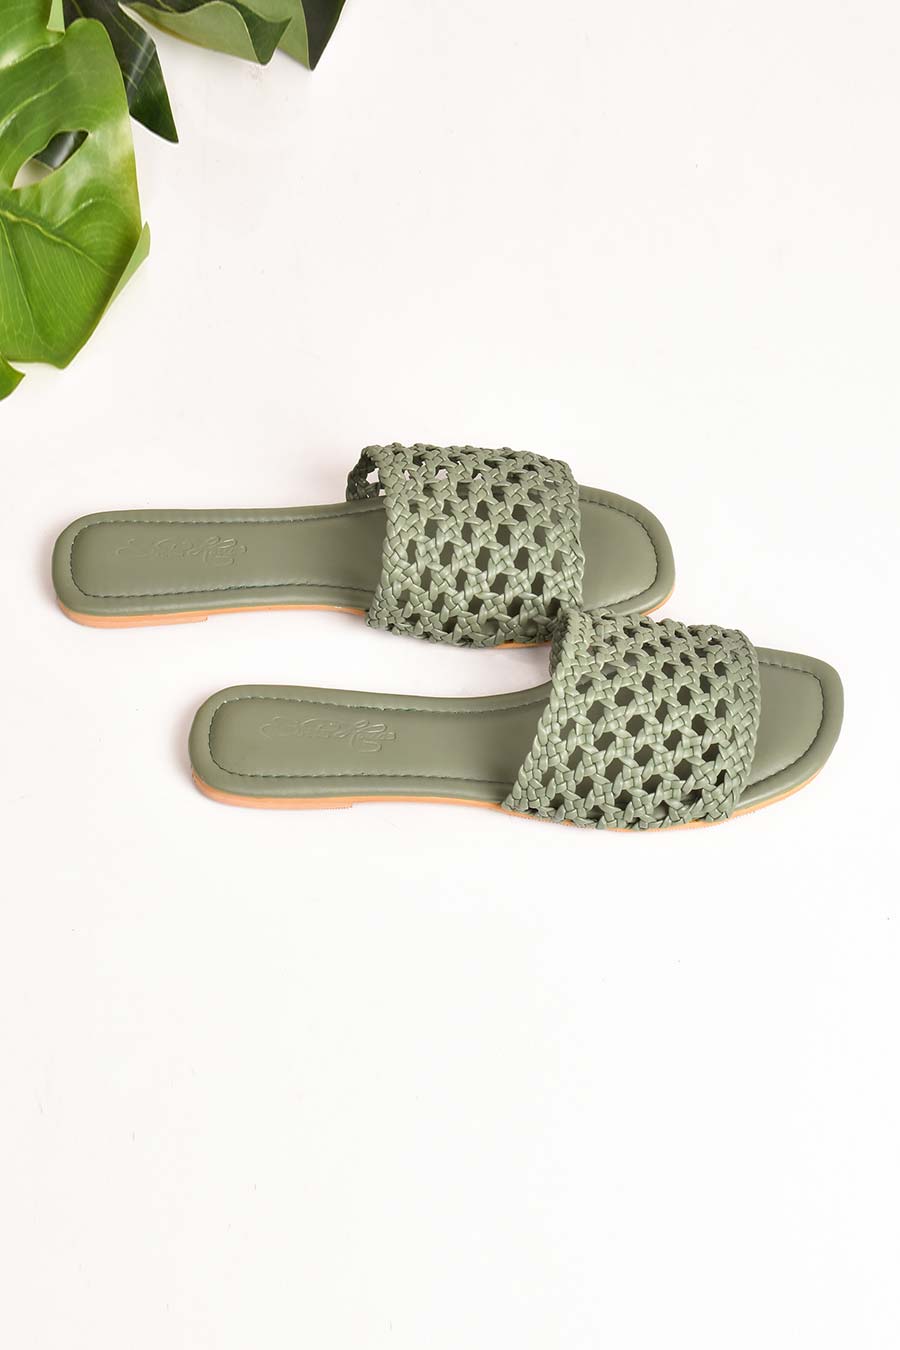 Hand Woven Olive Green Sliders